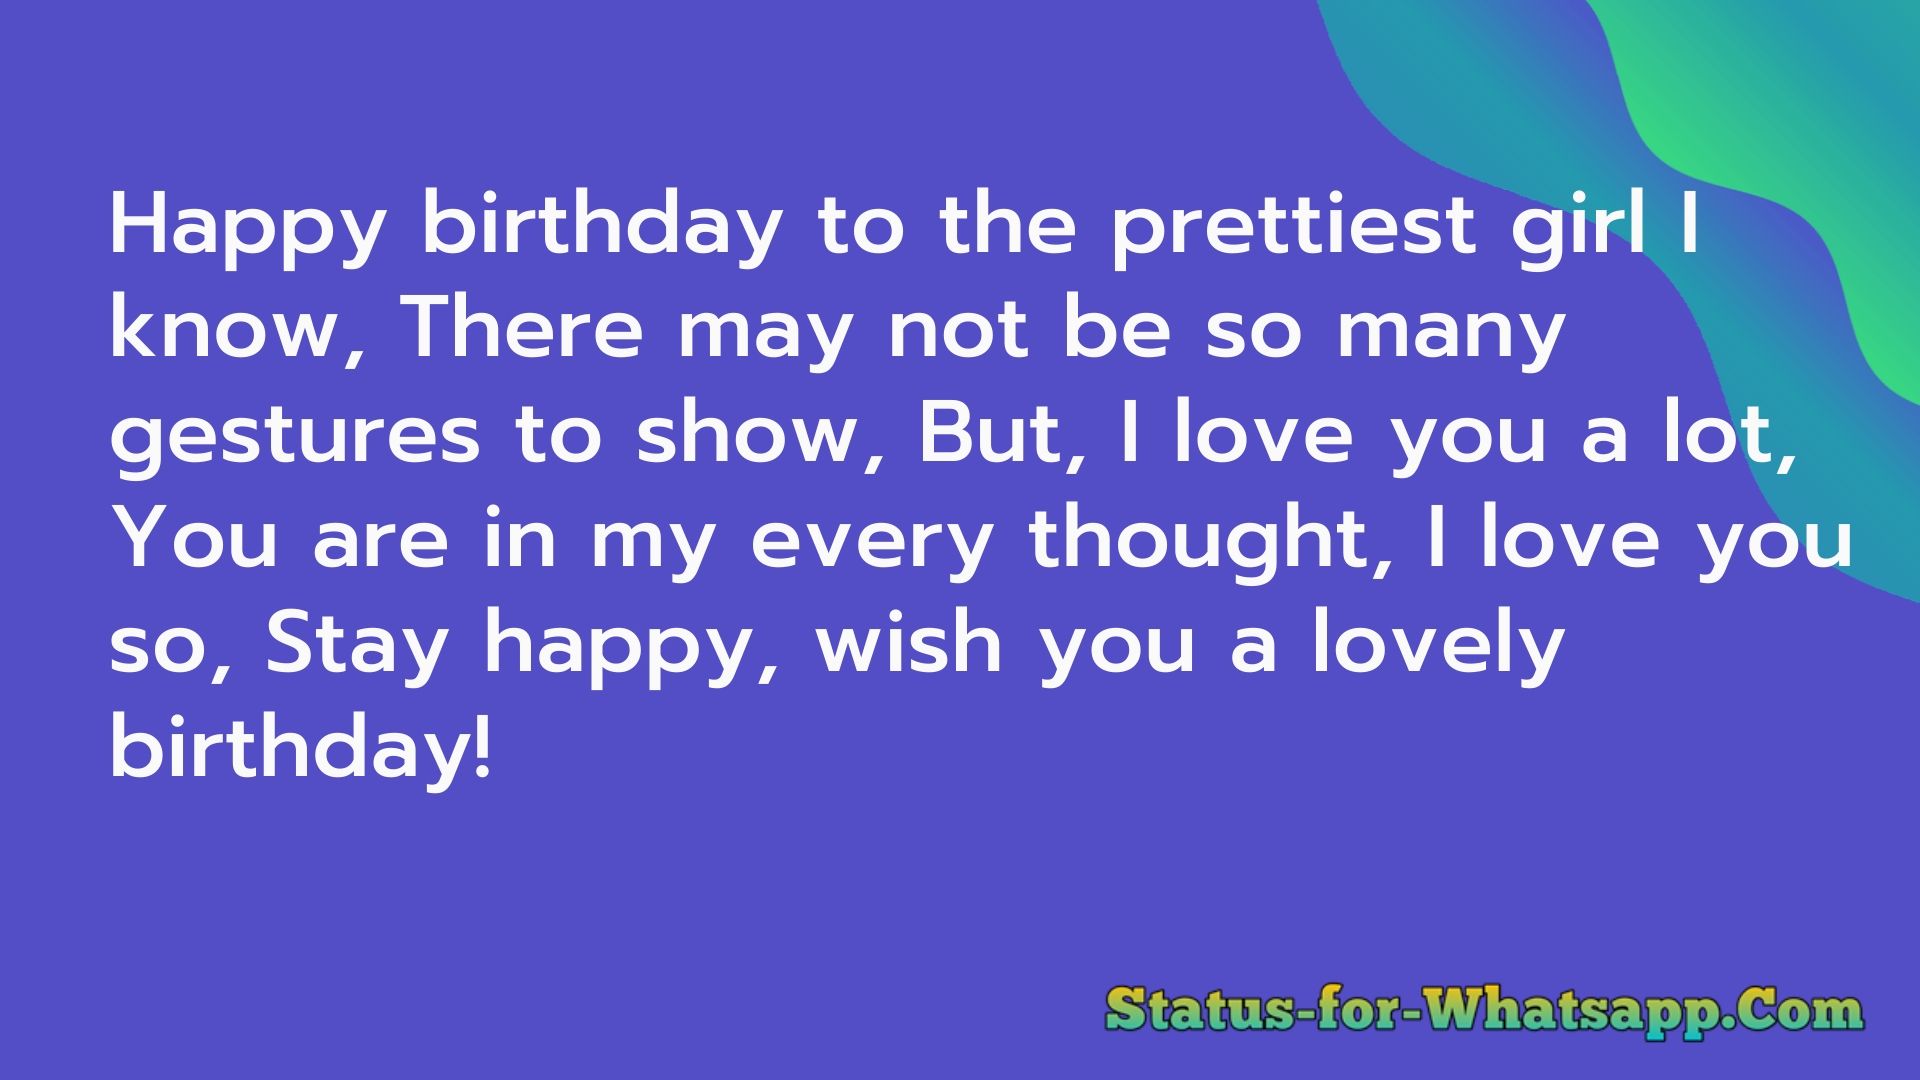 Birthday Wishes For Daughter birthday quotes, birthday greetings, birthday wishes quotes, birthday message, birthday wishes messages, wish you happy birthday, happy birthday daughter, birthday wishes to daughter, happy birthday daughter images, special birthday wishes, simple birthday wishes, happy birthday princess